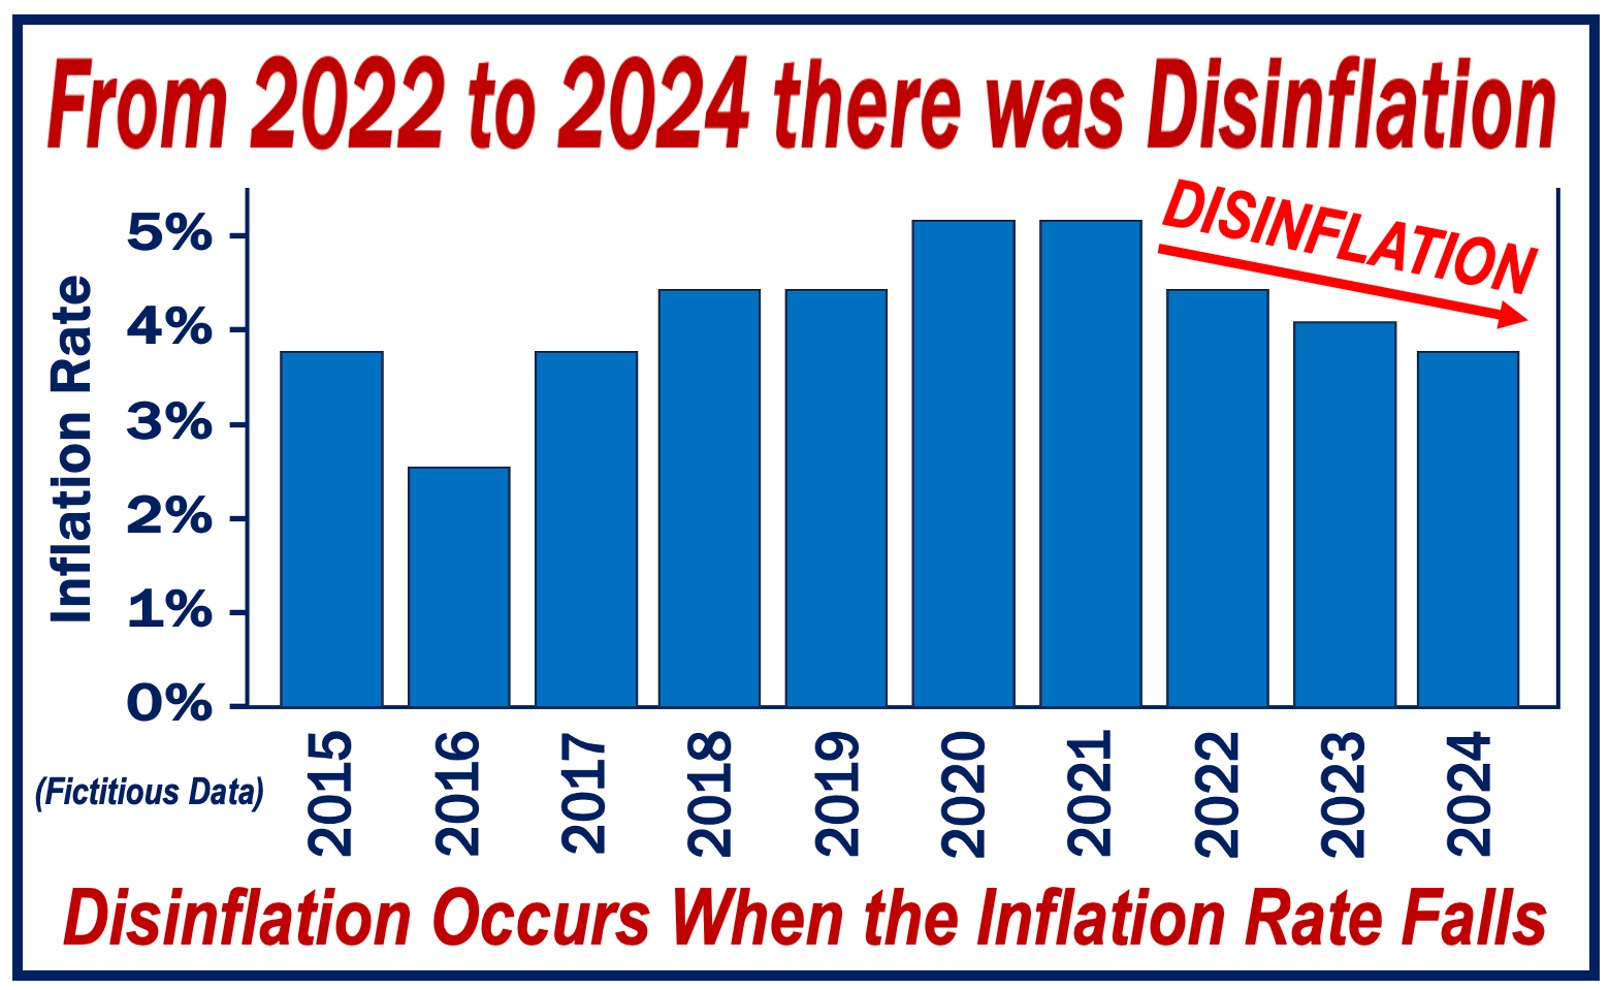 Bar graph depicting the concept of disinflation.